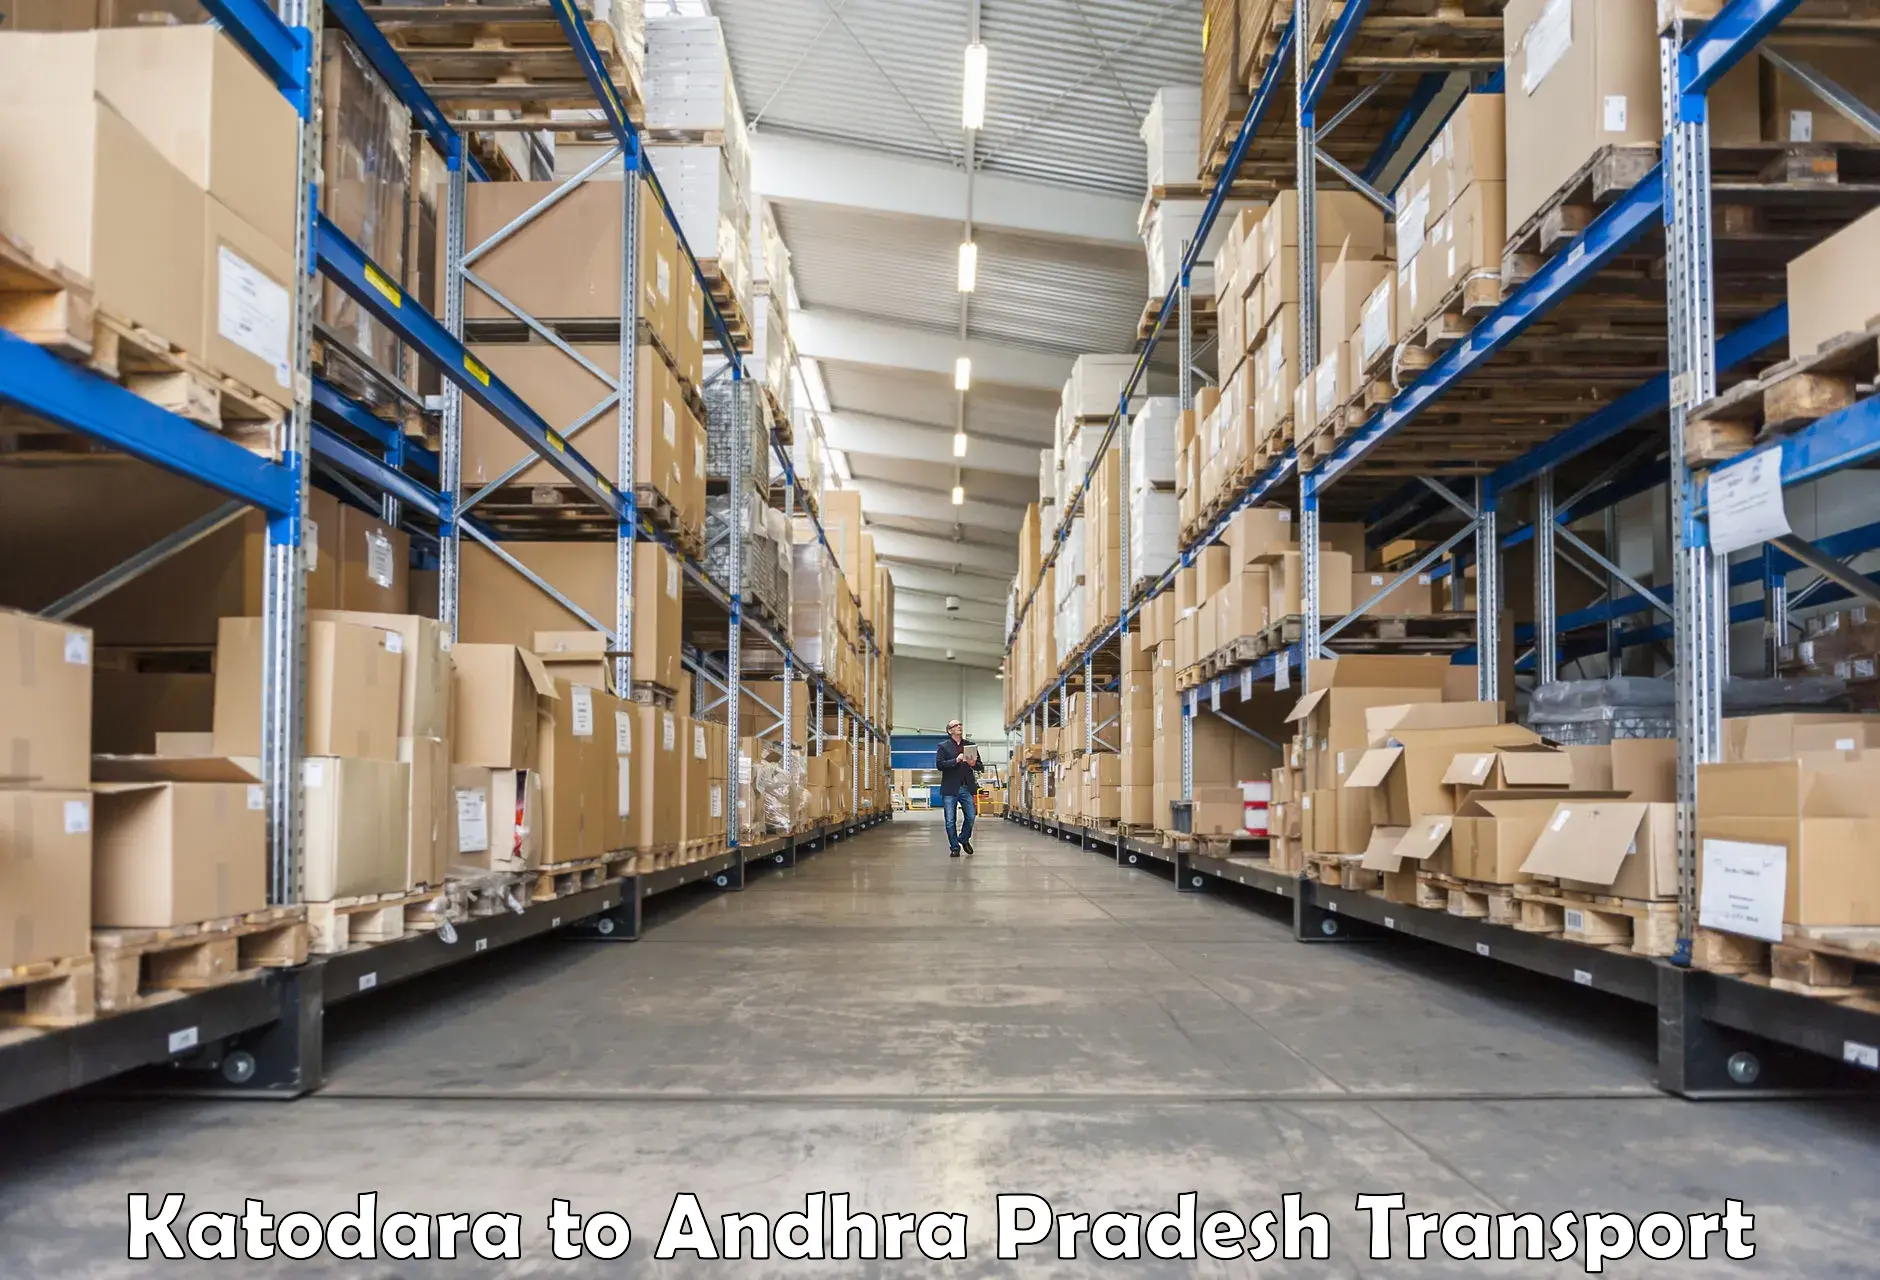 Truck transport companies in India in Katodara to Madanapalle